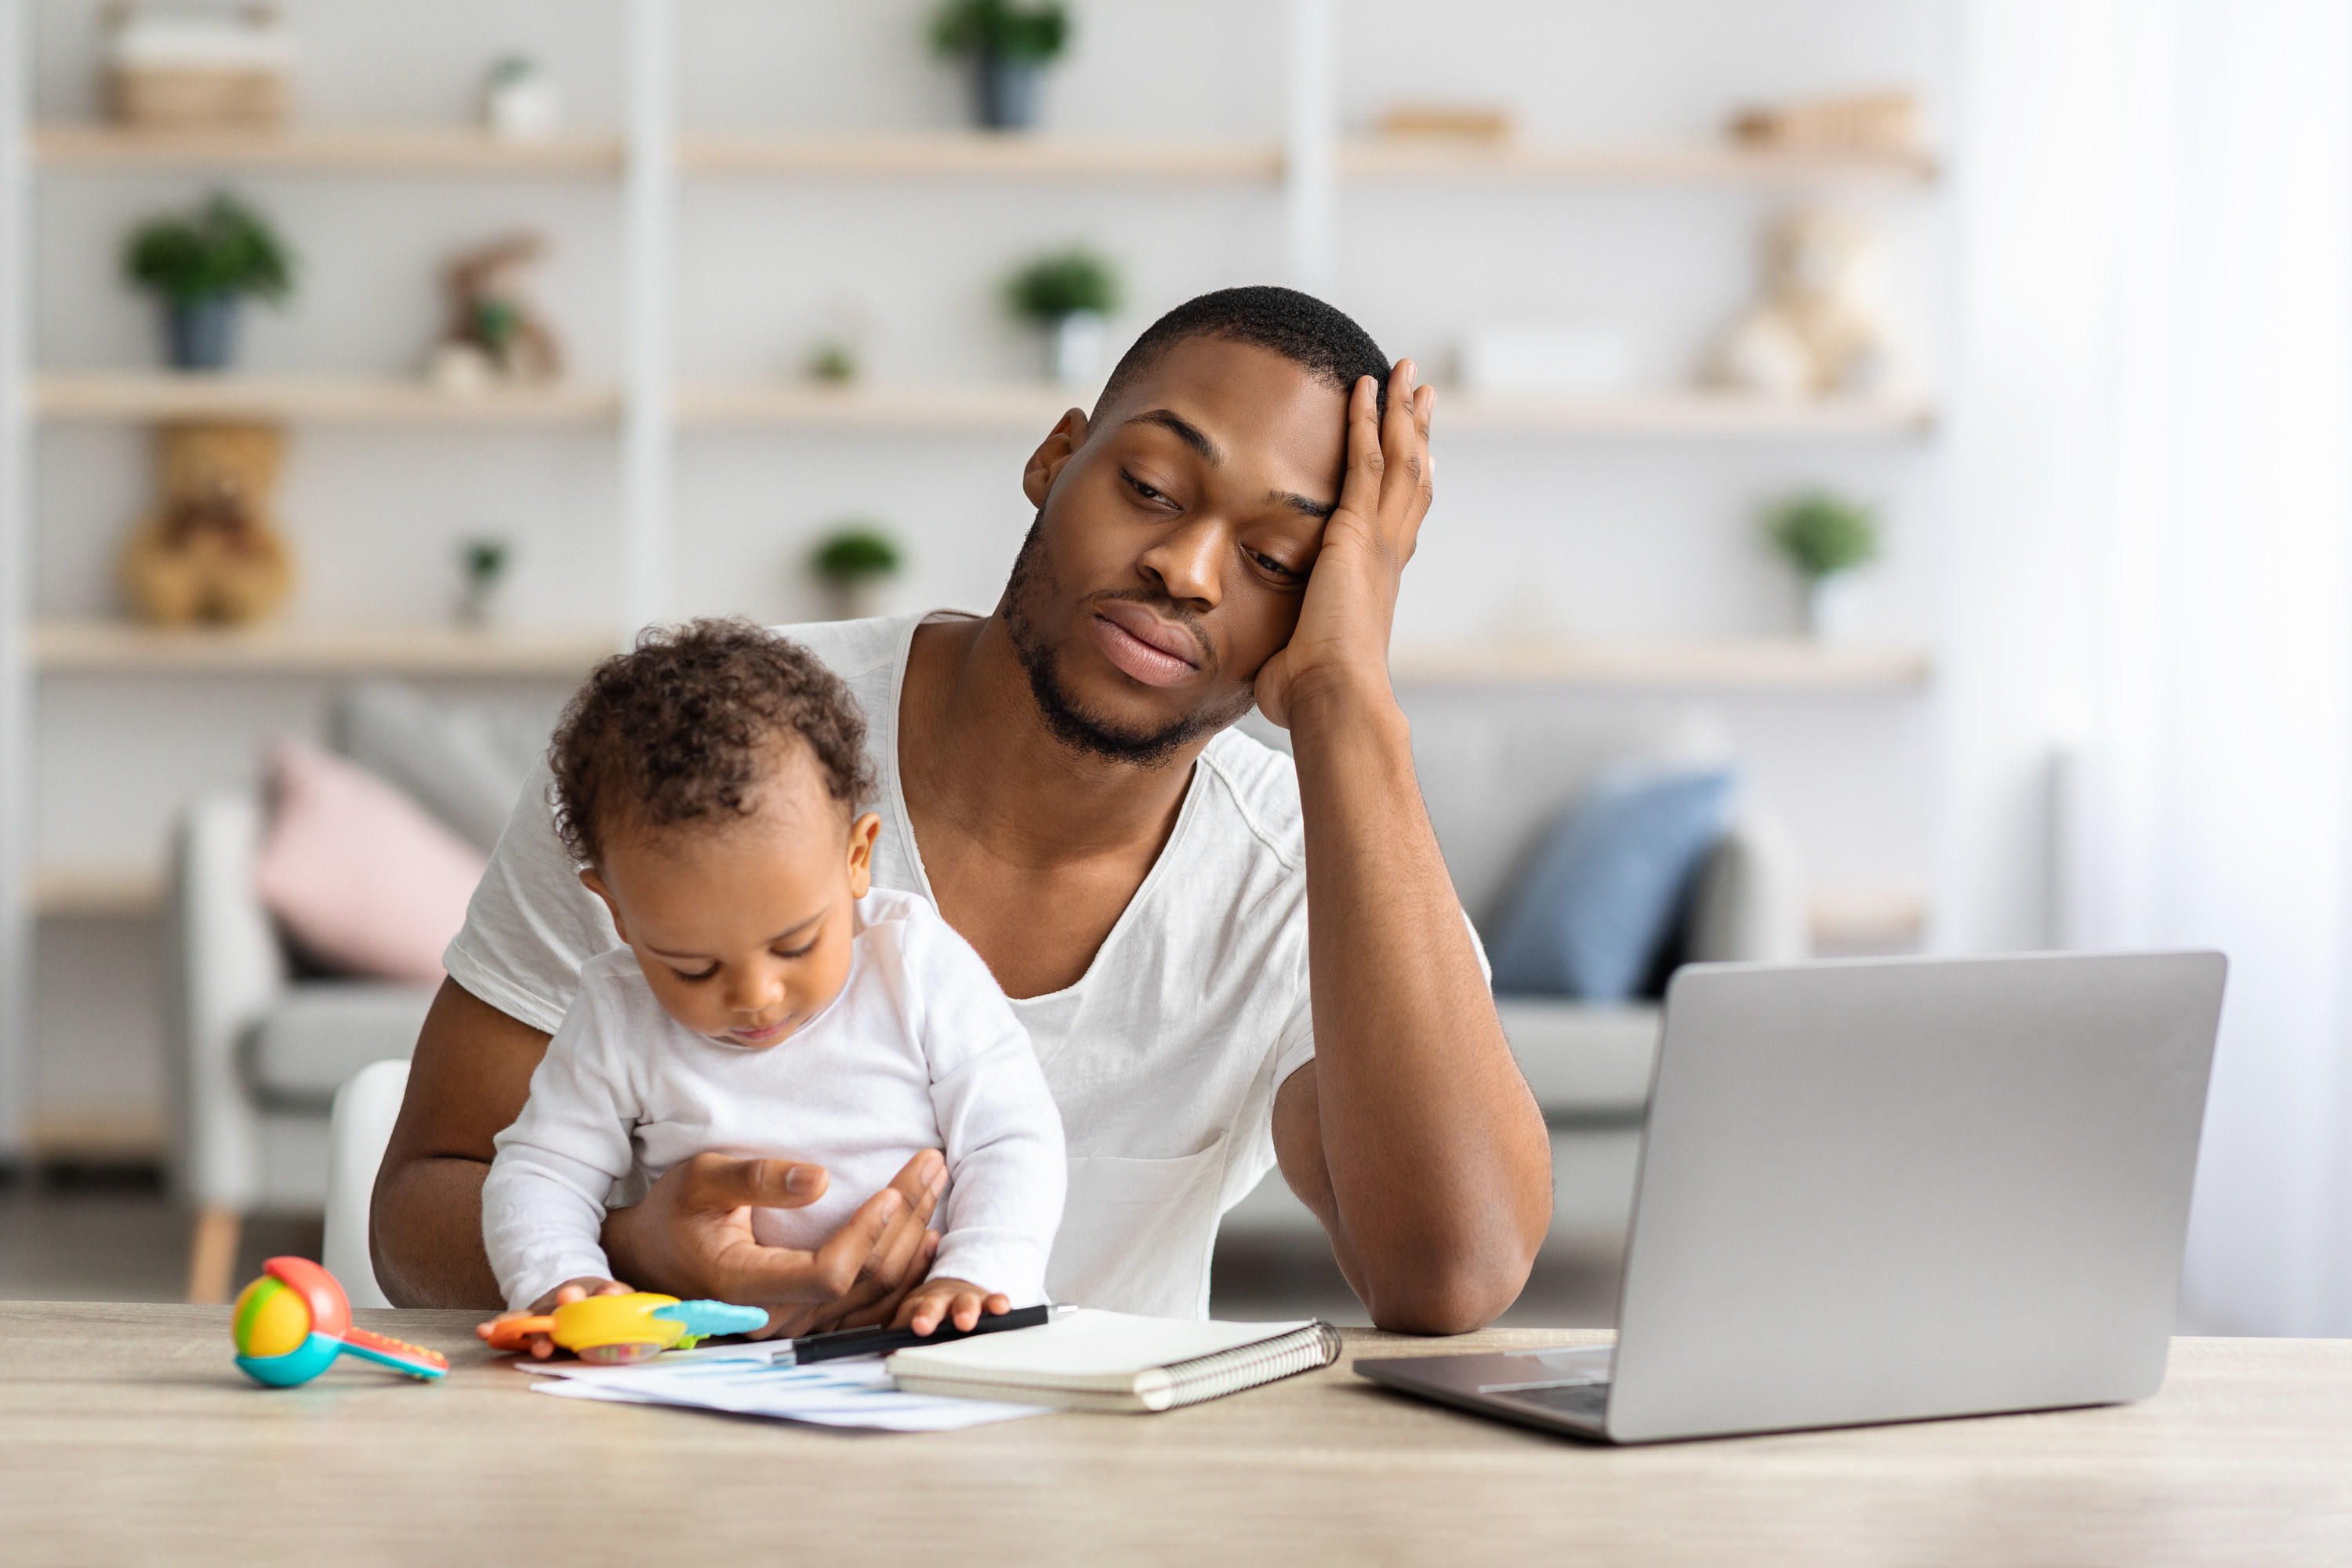 A father looks stressed as he watches his baby and works on his laptop